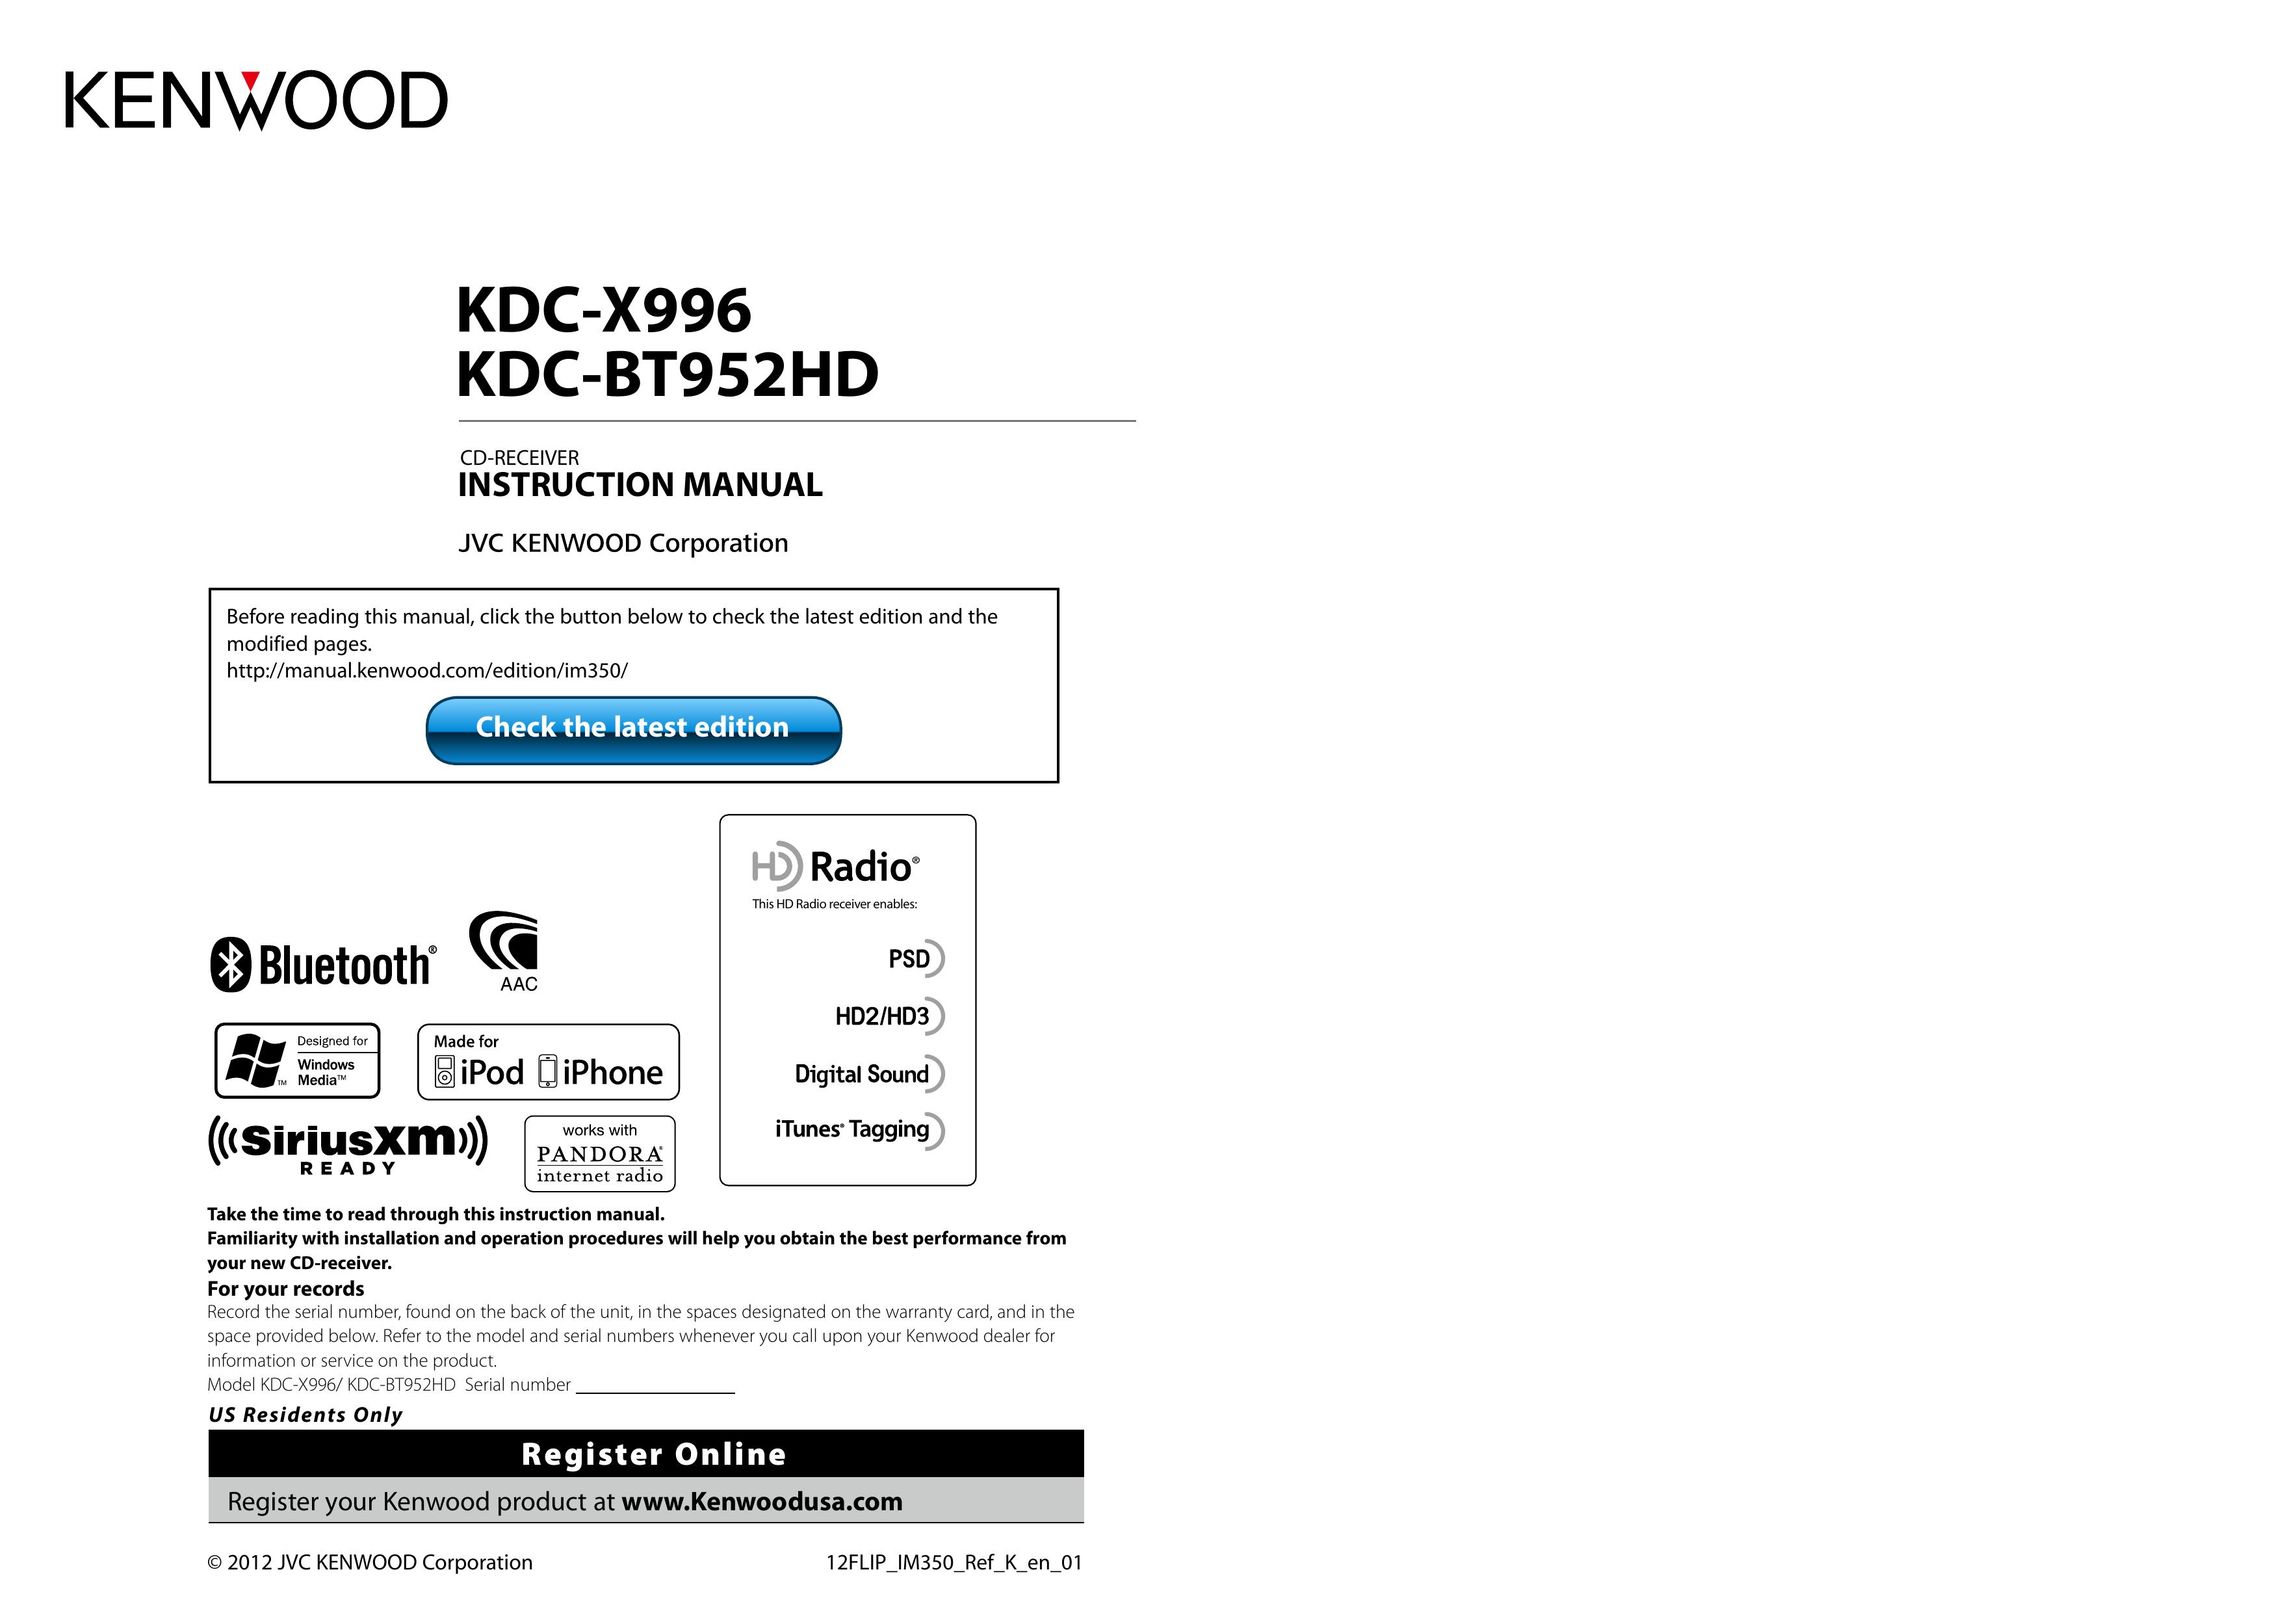 Kenwood KDC-X996 Stereo Receiver User Manual